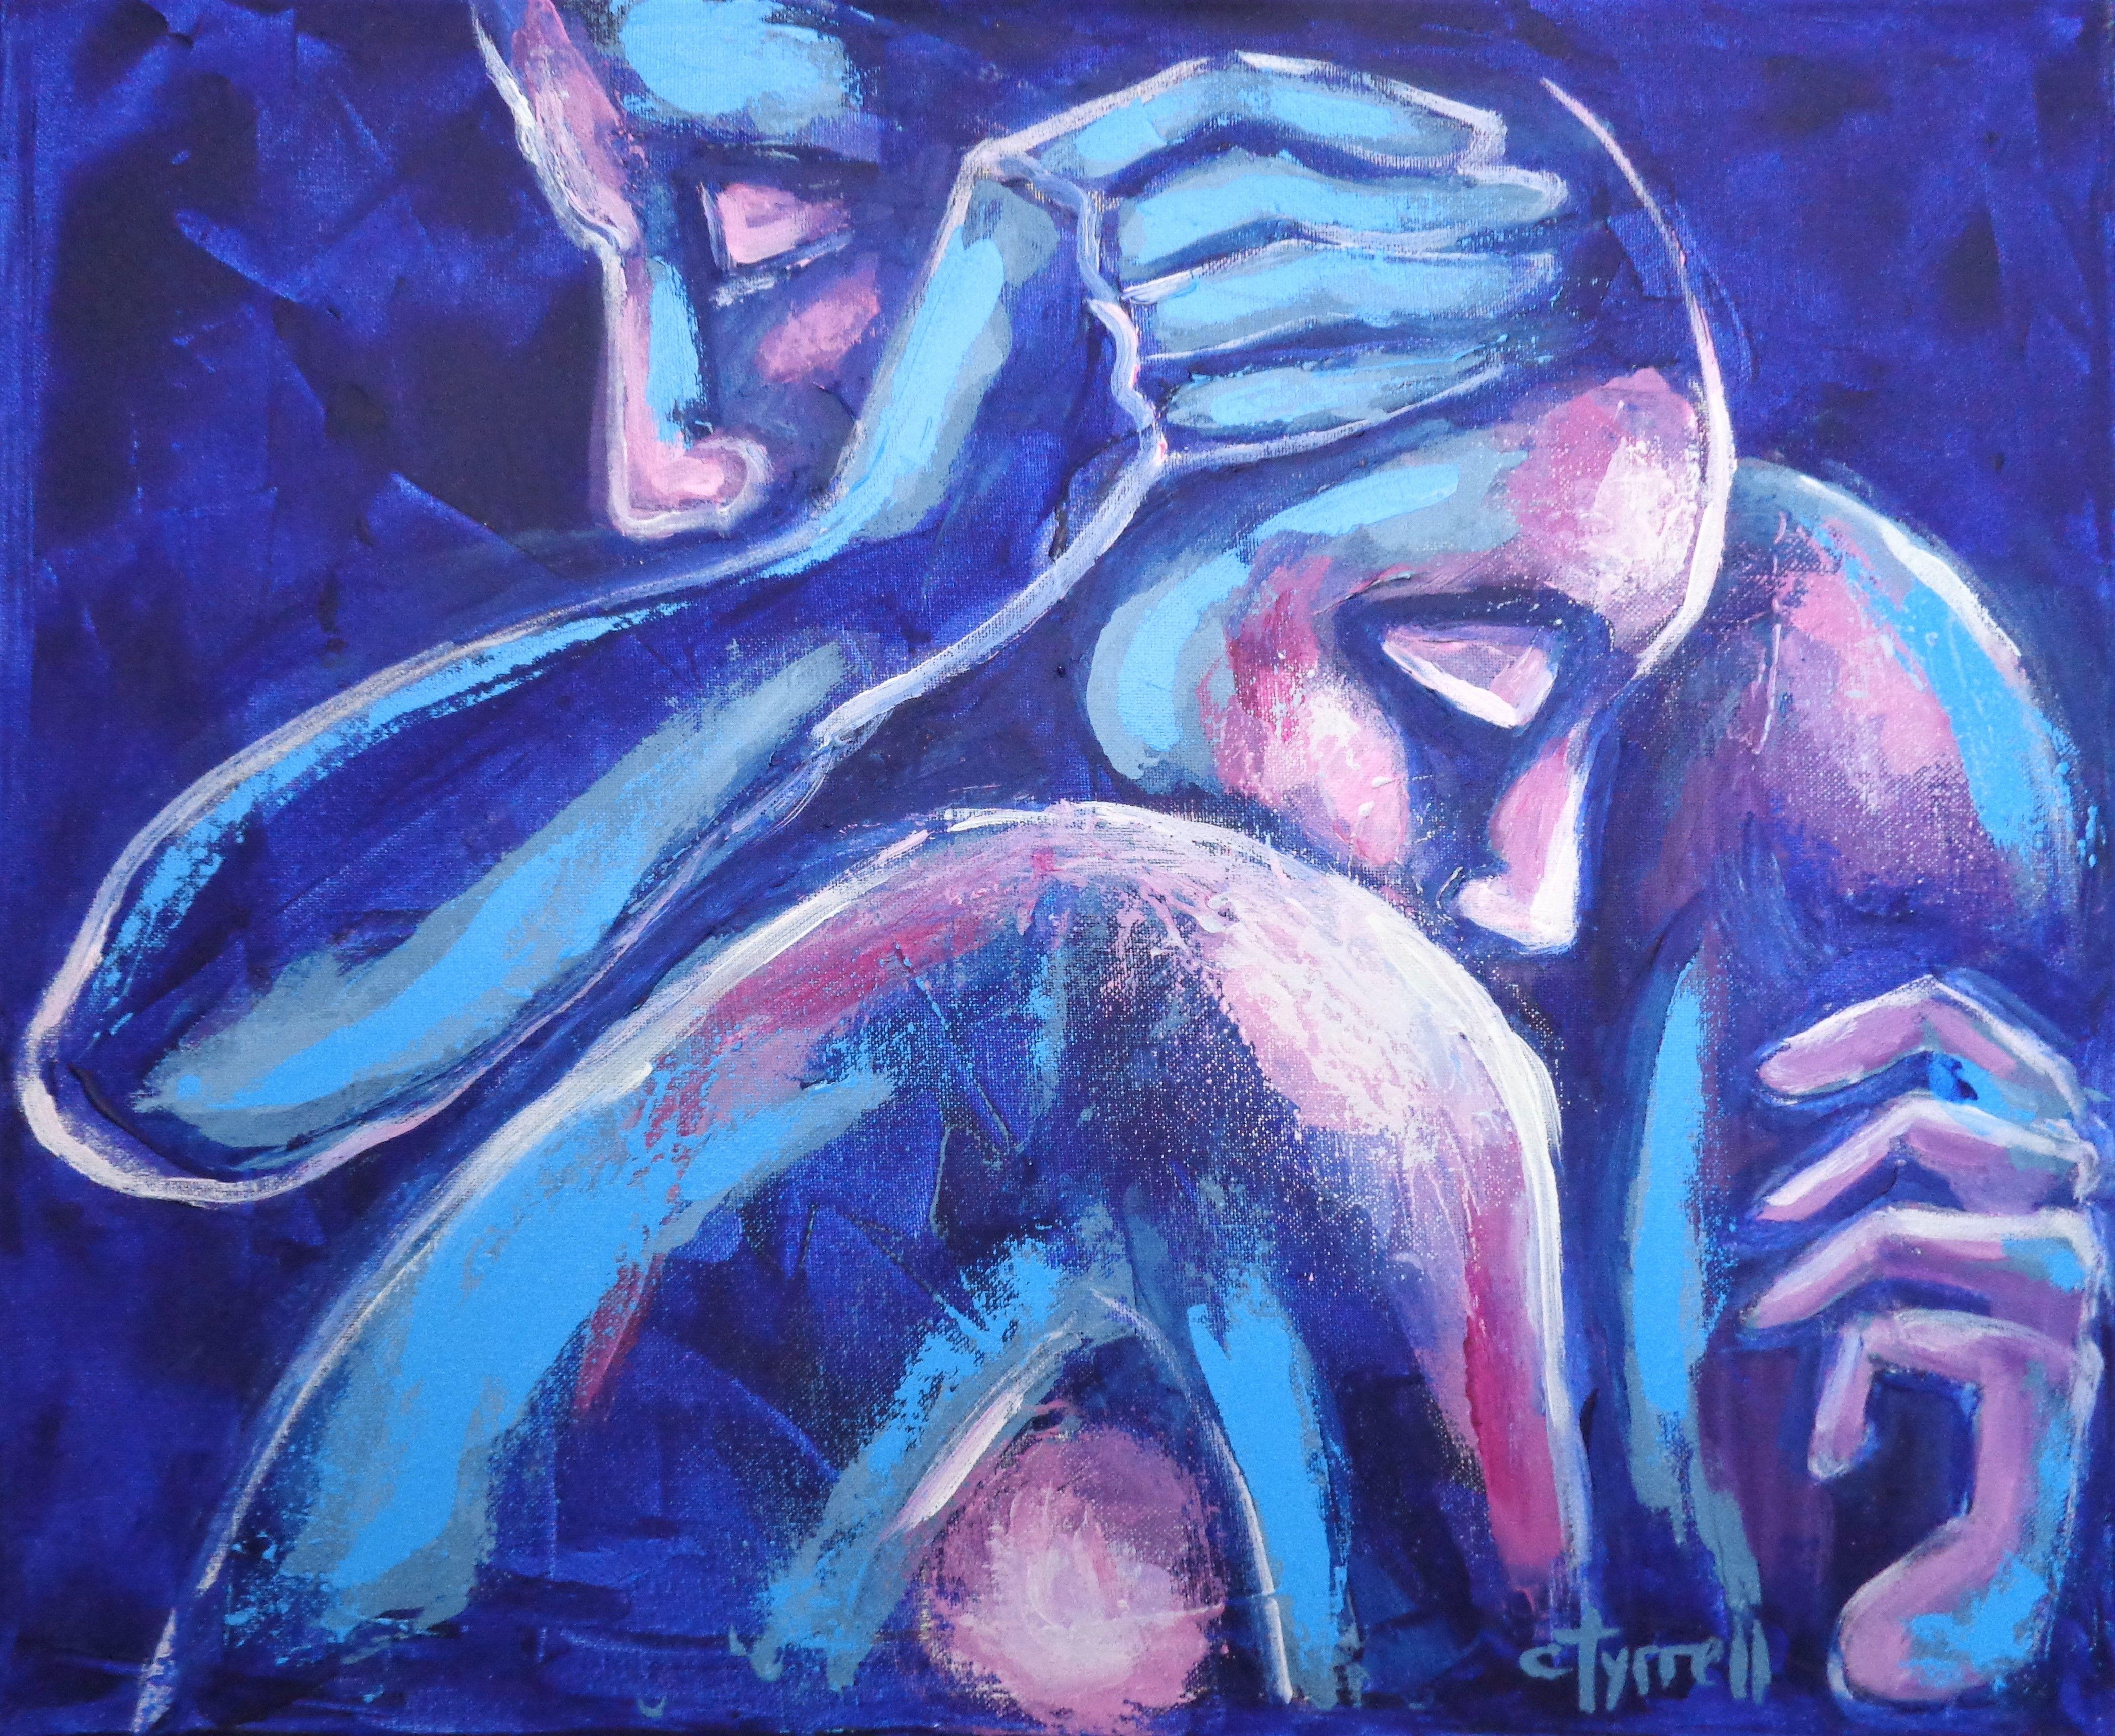 Original expressionist figurative acrylics painting on canvas, painted edges and ready to hang. Part of a new series of emotional and sensual paintings of embraced couples in love. Main colour BLUE brings calm and tranquility and the accents of